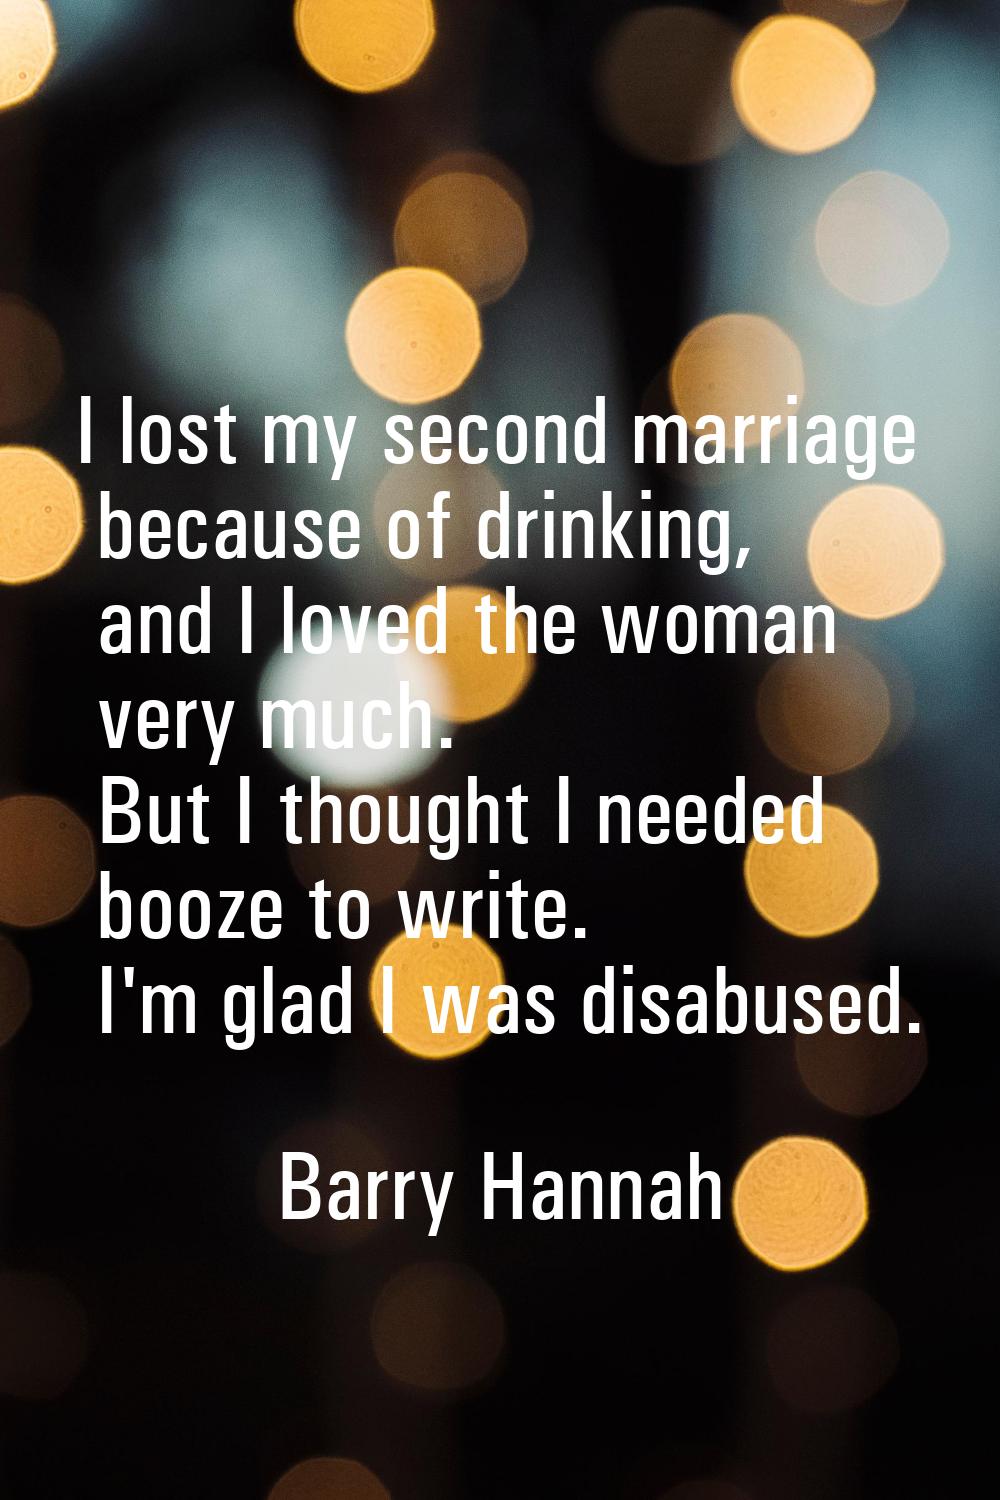 I lost my second marriage because of drinking, and I loved the woman very much. But I thought I nee